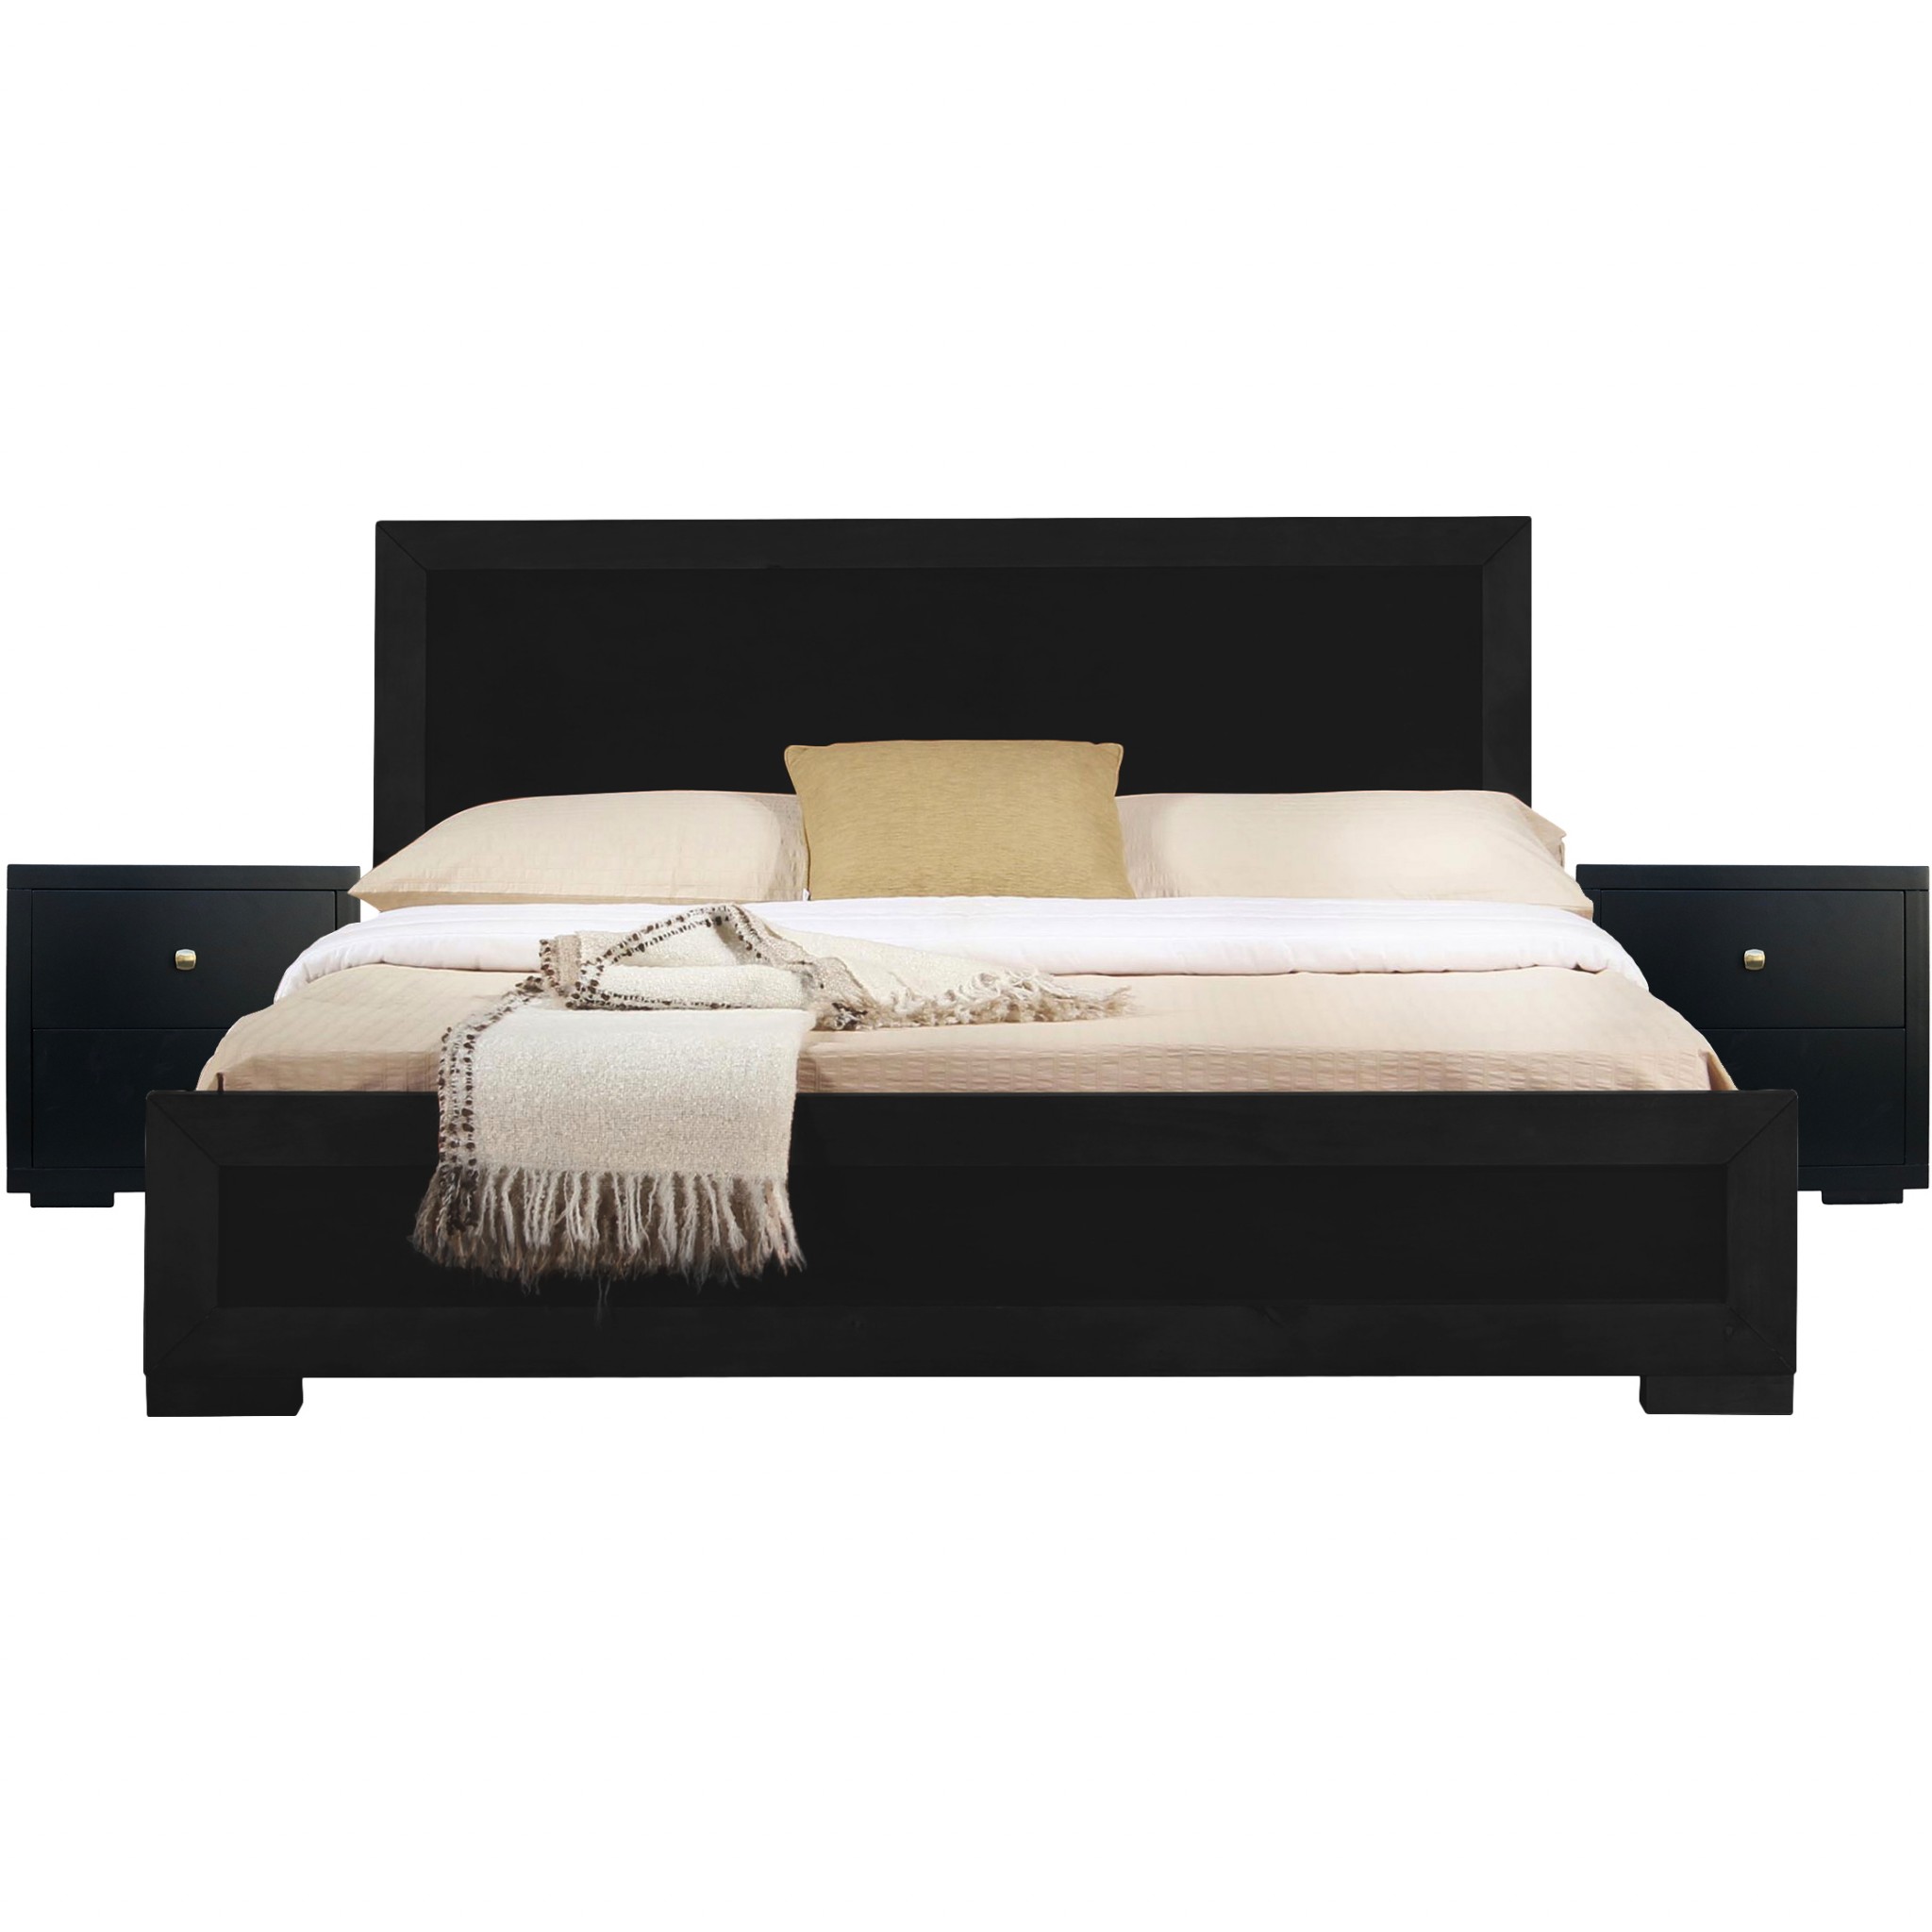 Moma Black Wood Platform King Bed With Two Nightstands-467613-1